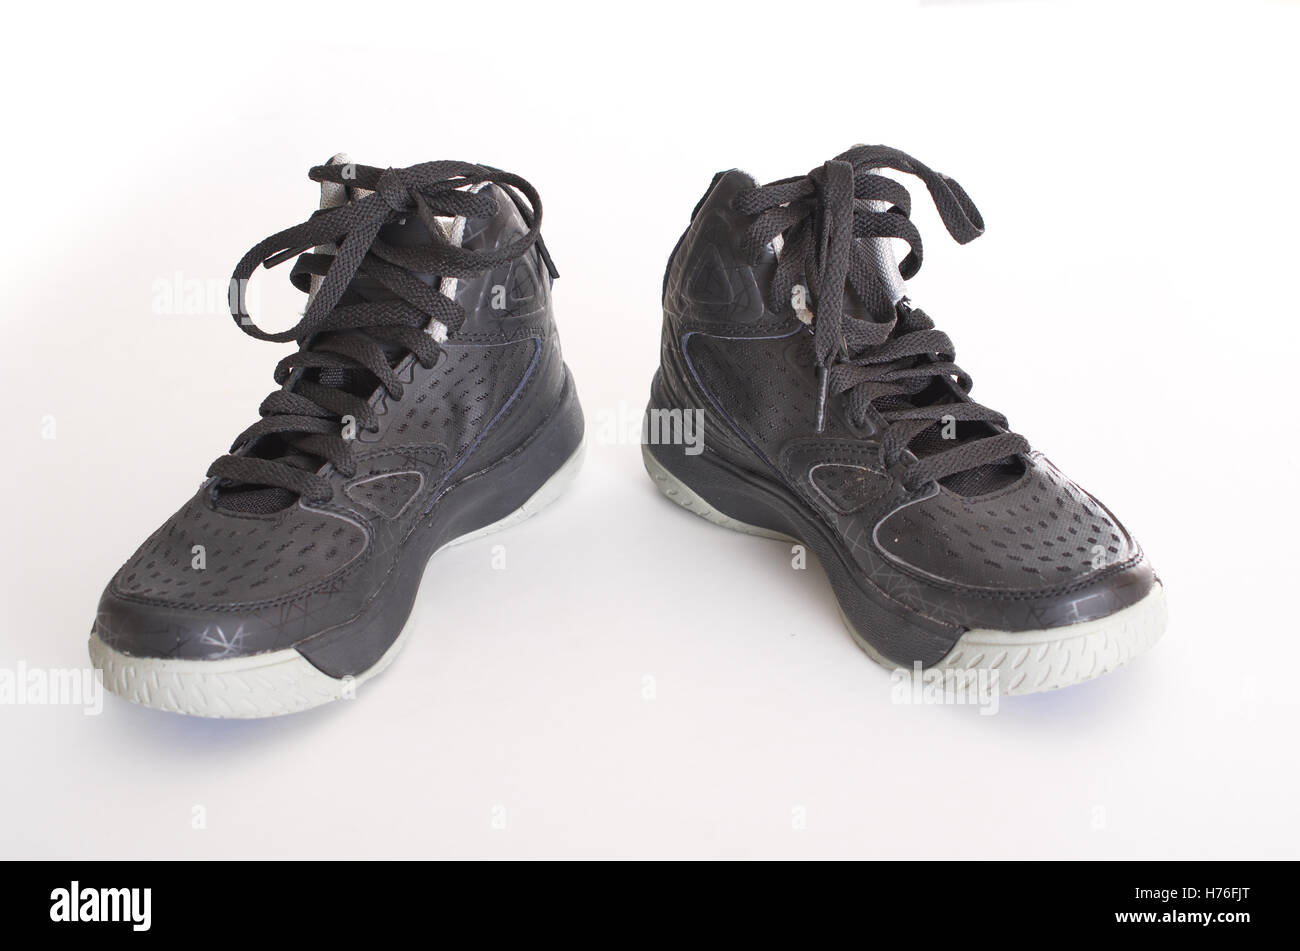 black leather basketball shoes